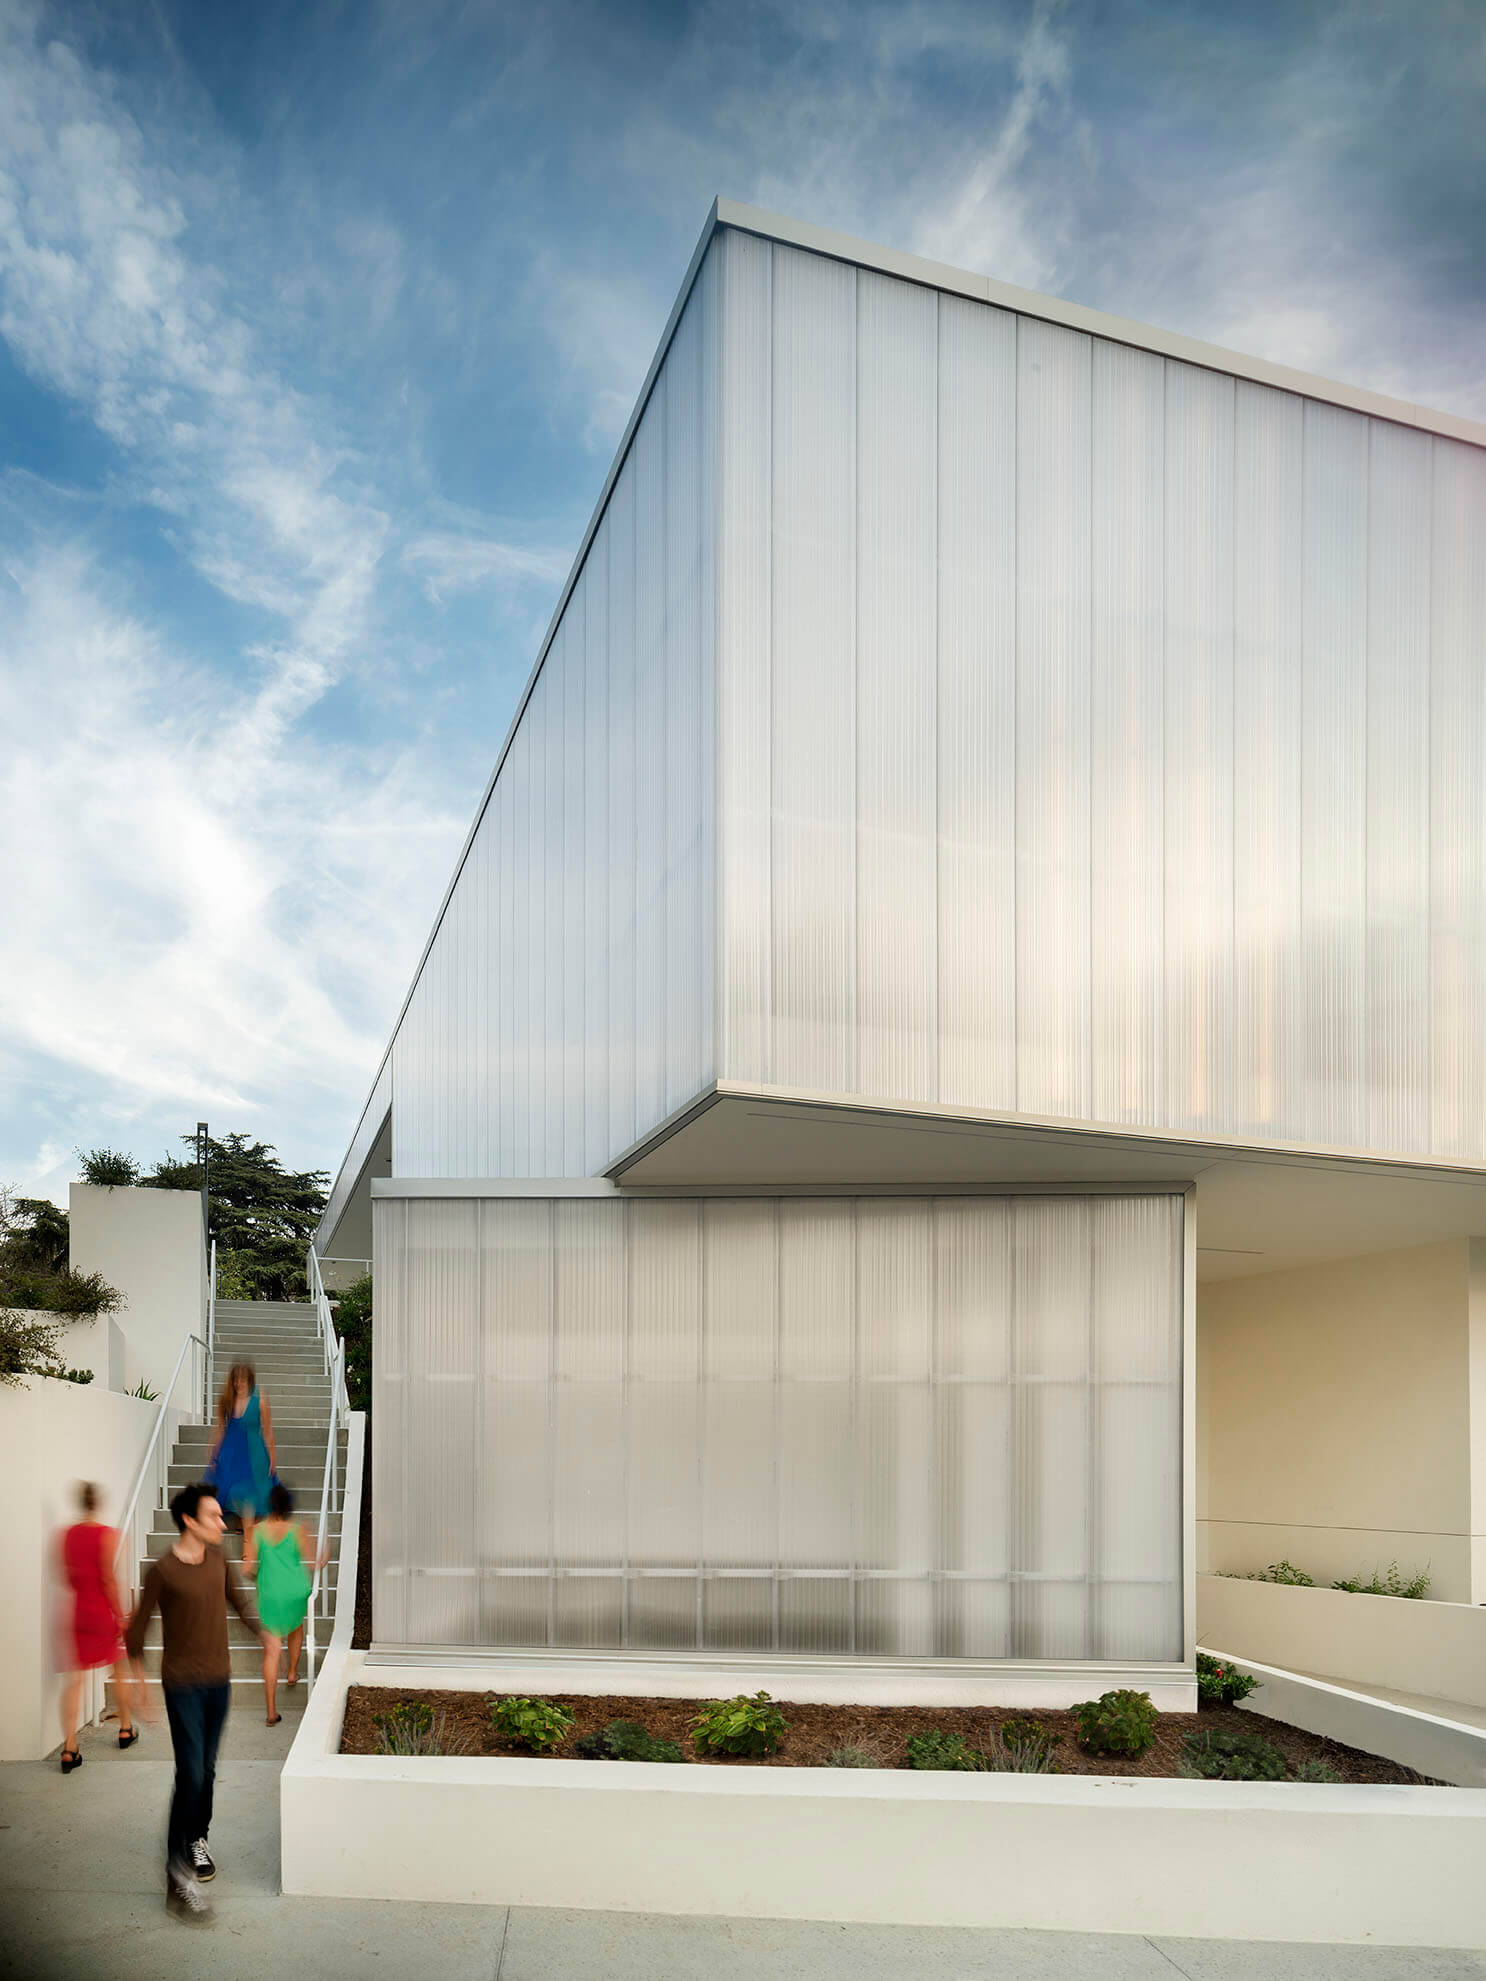 exterior view of a performing arts building wrapped in a polycarbonate facade